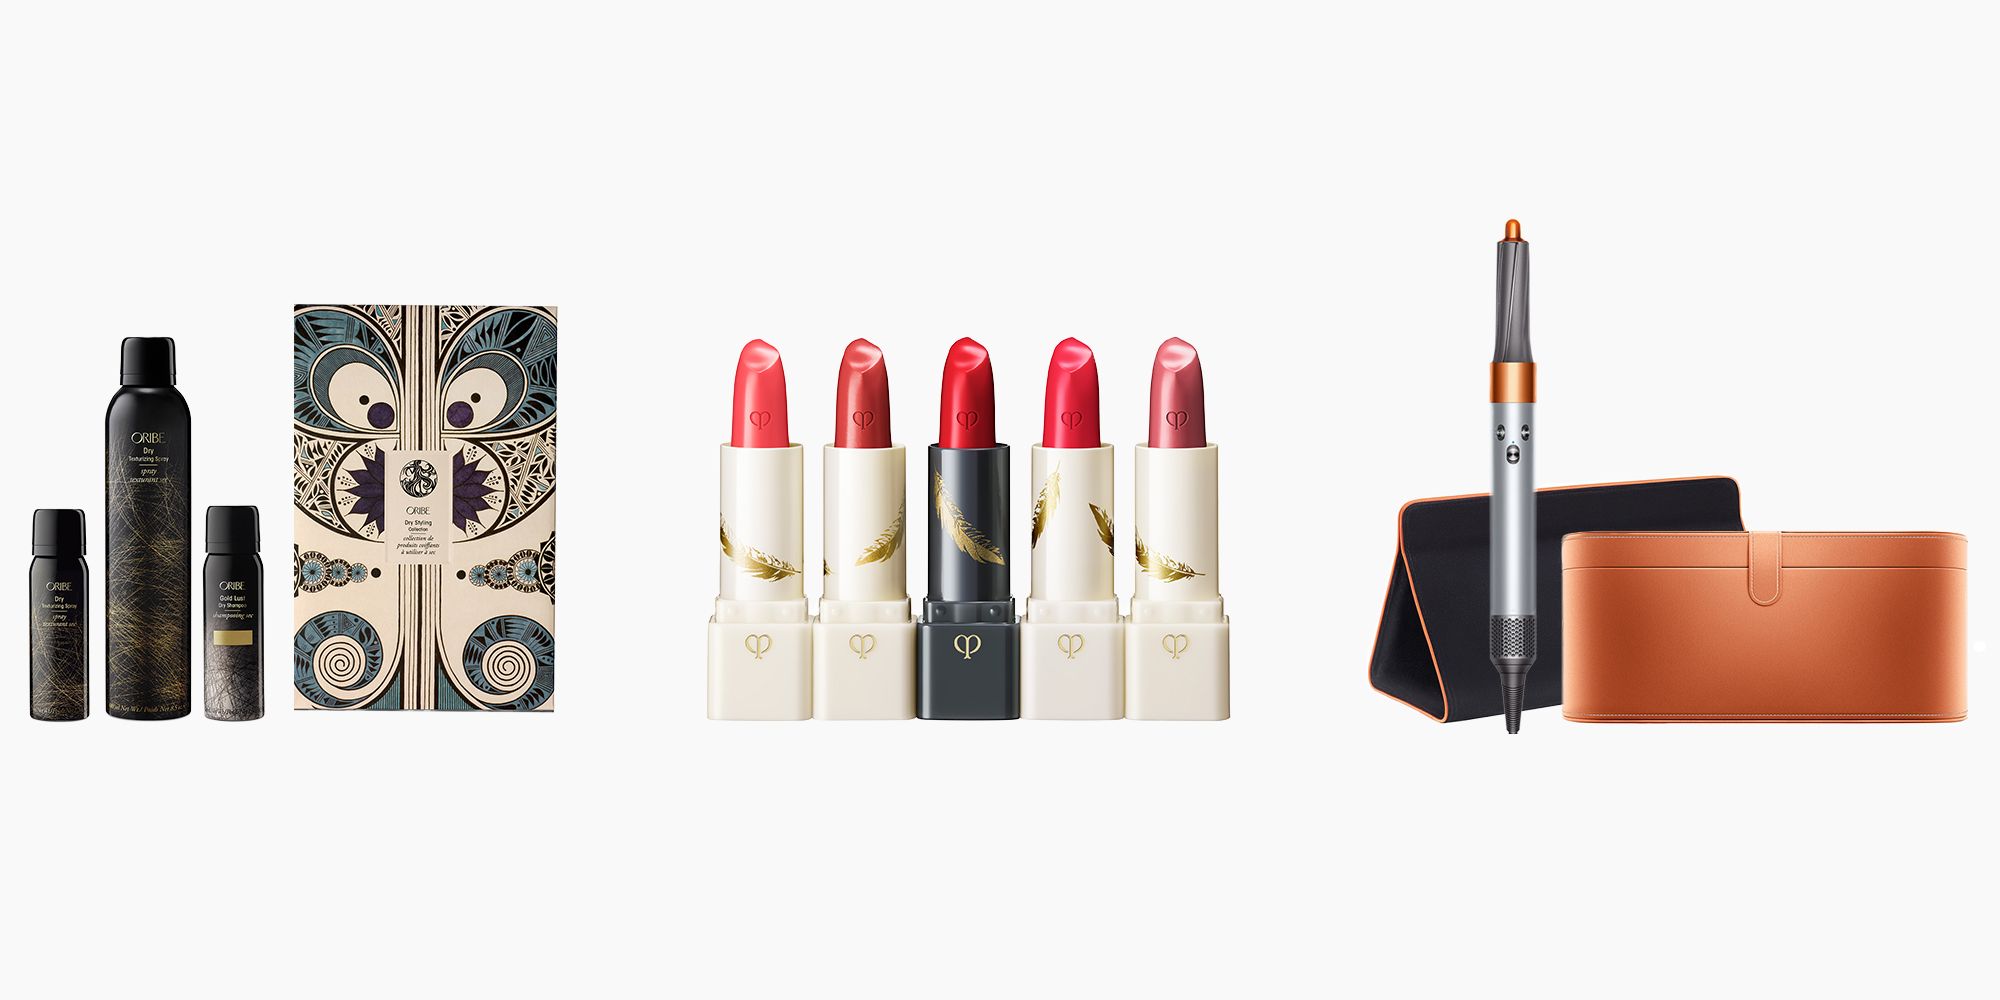 best cosmetic gifts for her